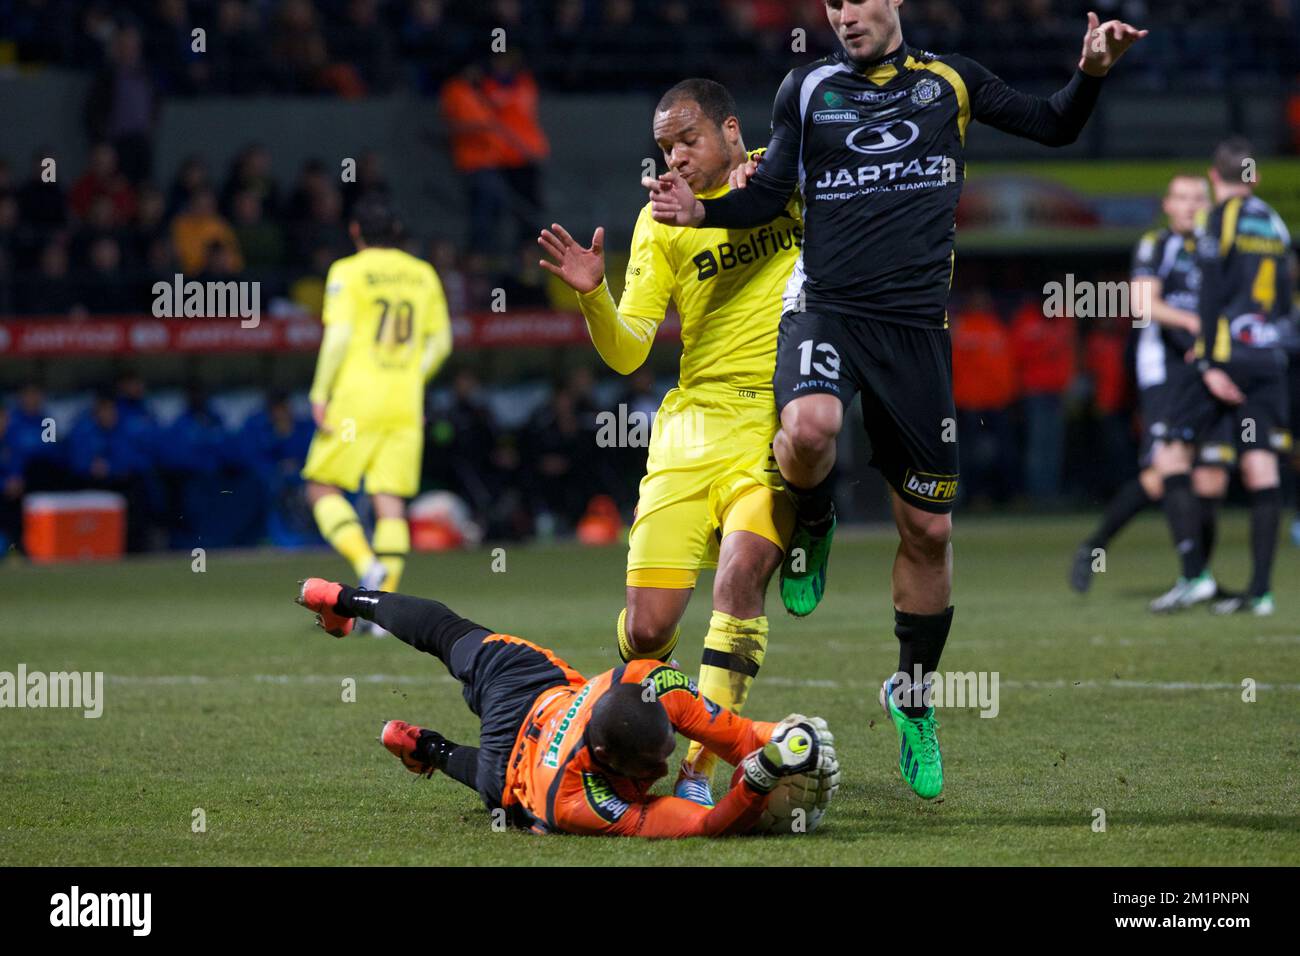 Lokeren's goalkeeper Barry Boubacar Copa, Club Brugge's Vadis Odjidja Ofoe and Lokeren's Georgios Galitsios fight for the ball during the Jupiler Pro League match of Play-Off 1, between Sporting Lokeren and Club Brugge in Lokeren Stock Photo